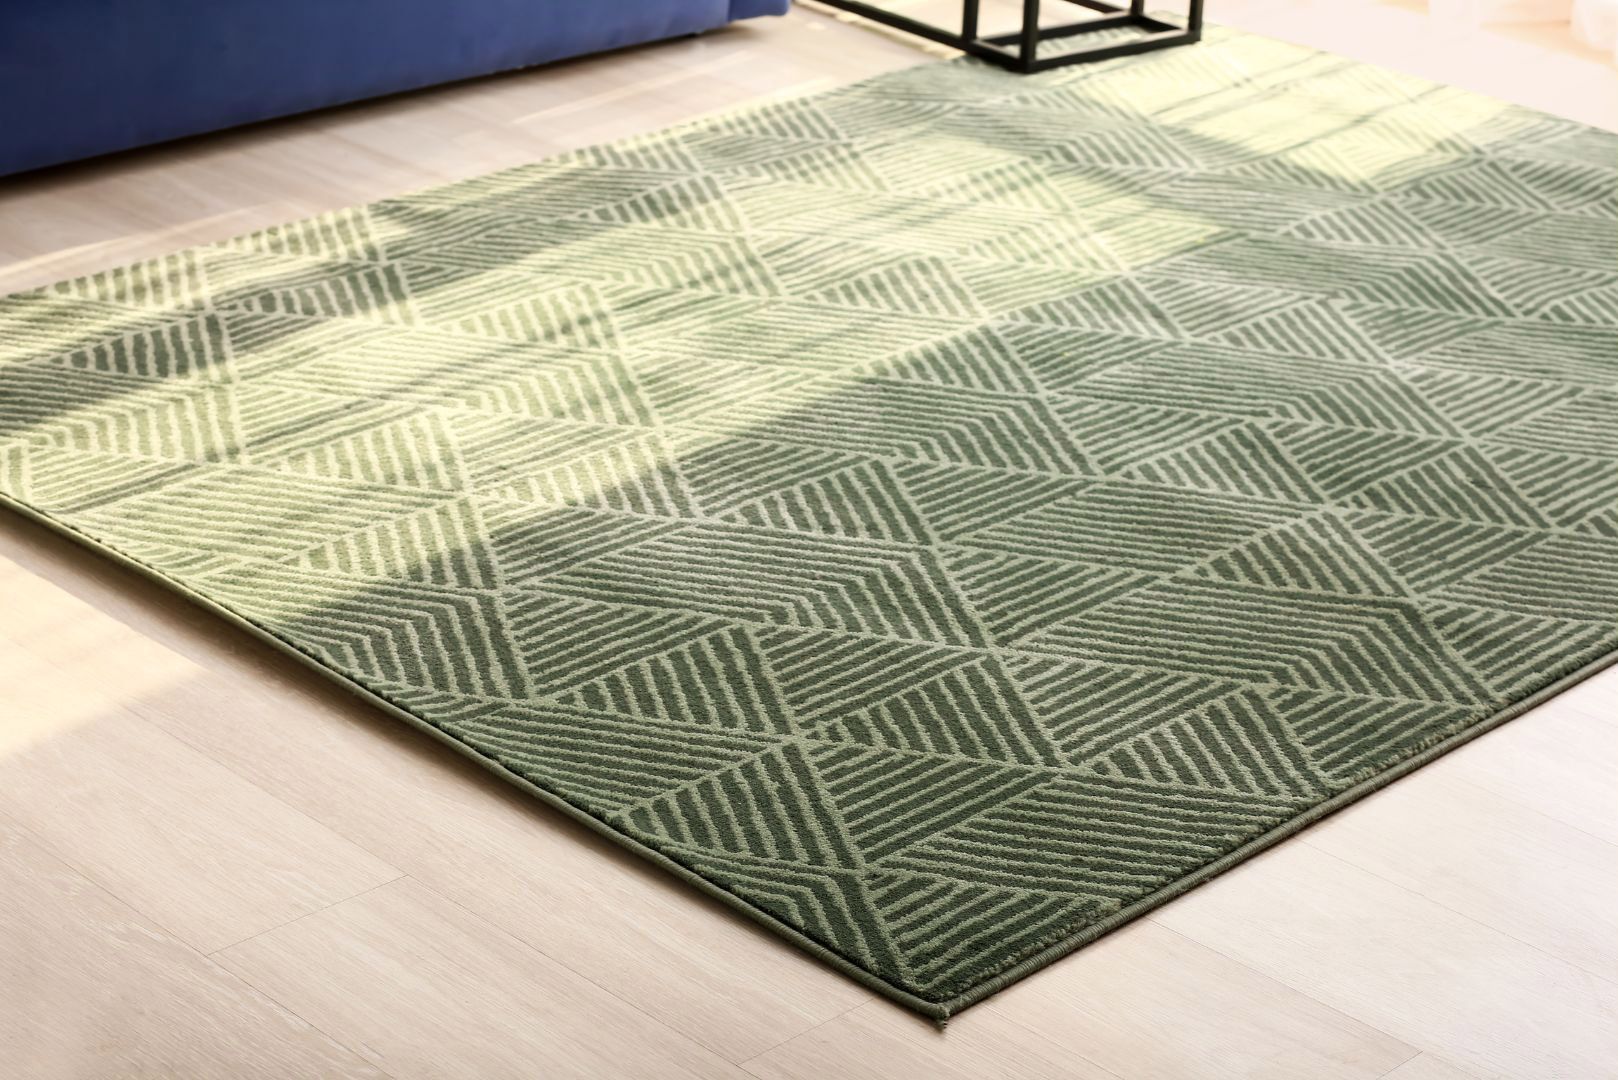 A green rug is sitting on a wooden floor in a living room next to a blue couch.